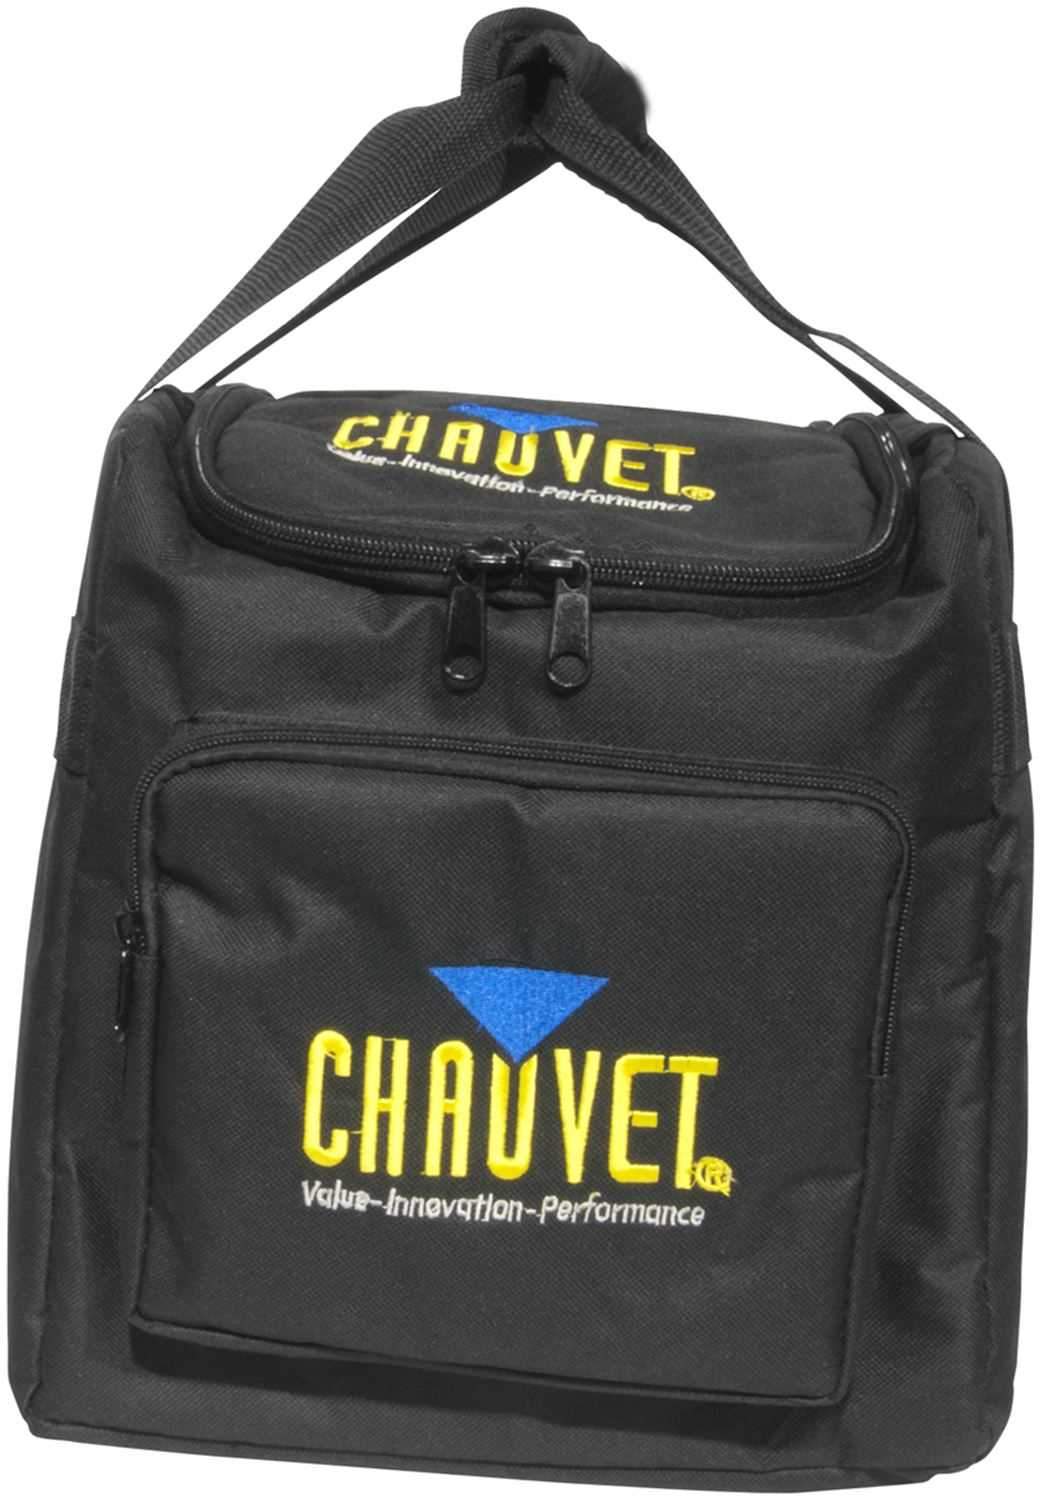 Chauvet CHS-25 VIP Gear Bag For LED Par Cans - ProSound and Stage Lighting